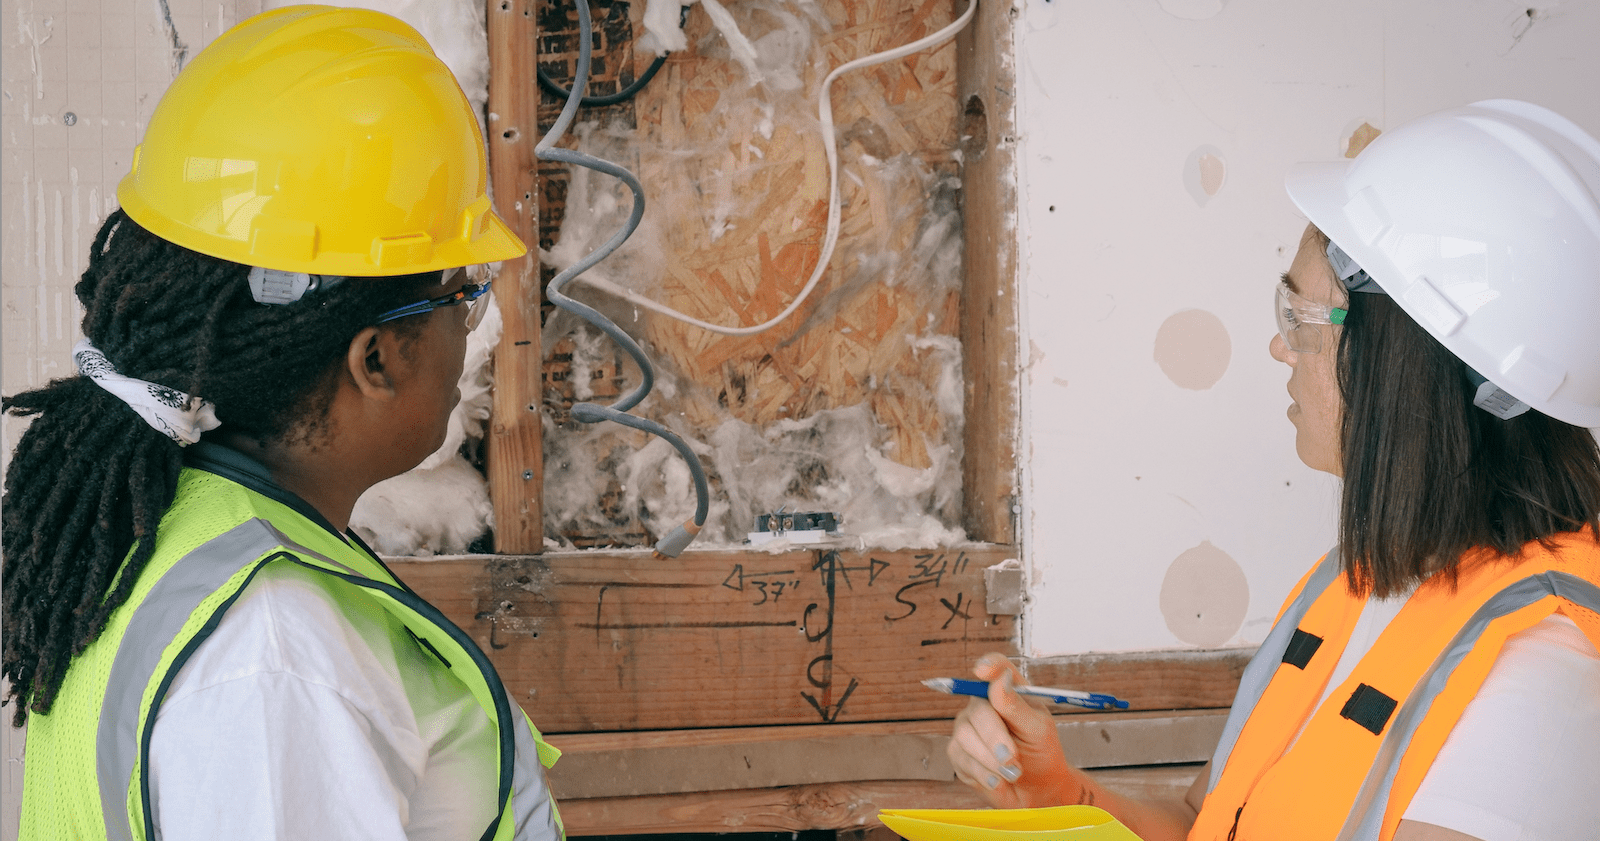 Women in construction on jobsite as an example of diversity in construction